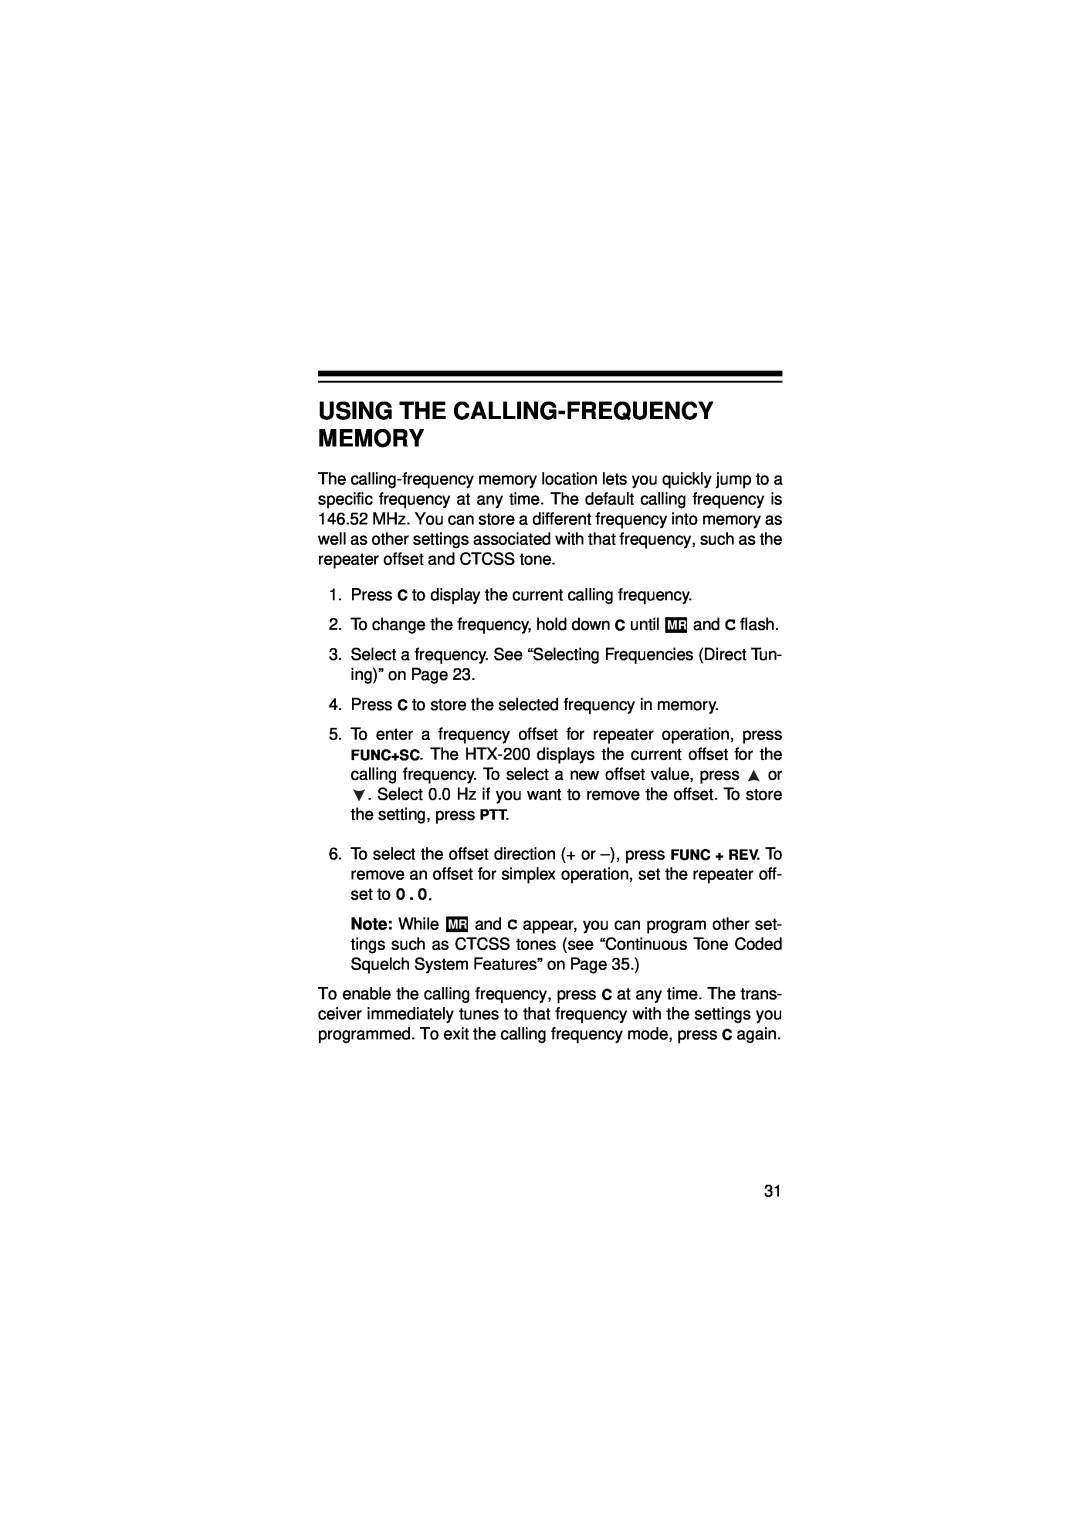 Radio Shack HTX-200 owner manual Using The Calling-Frequencymemory 